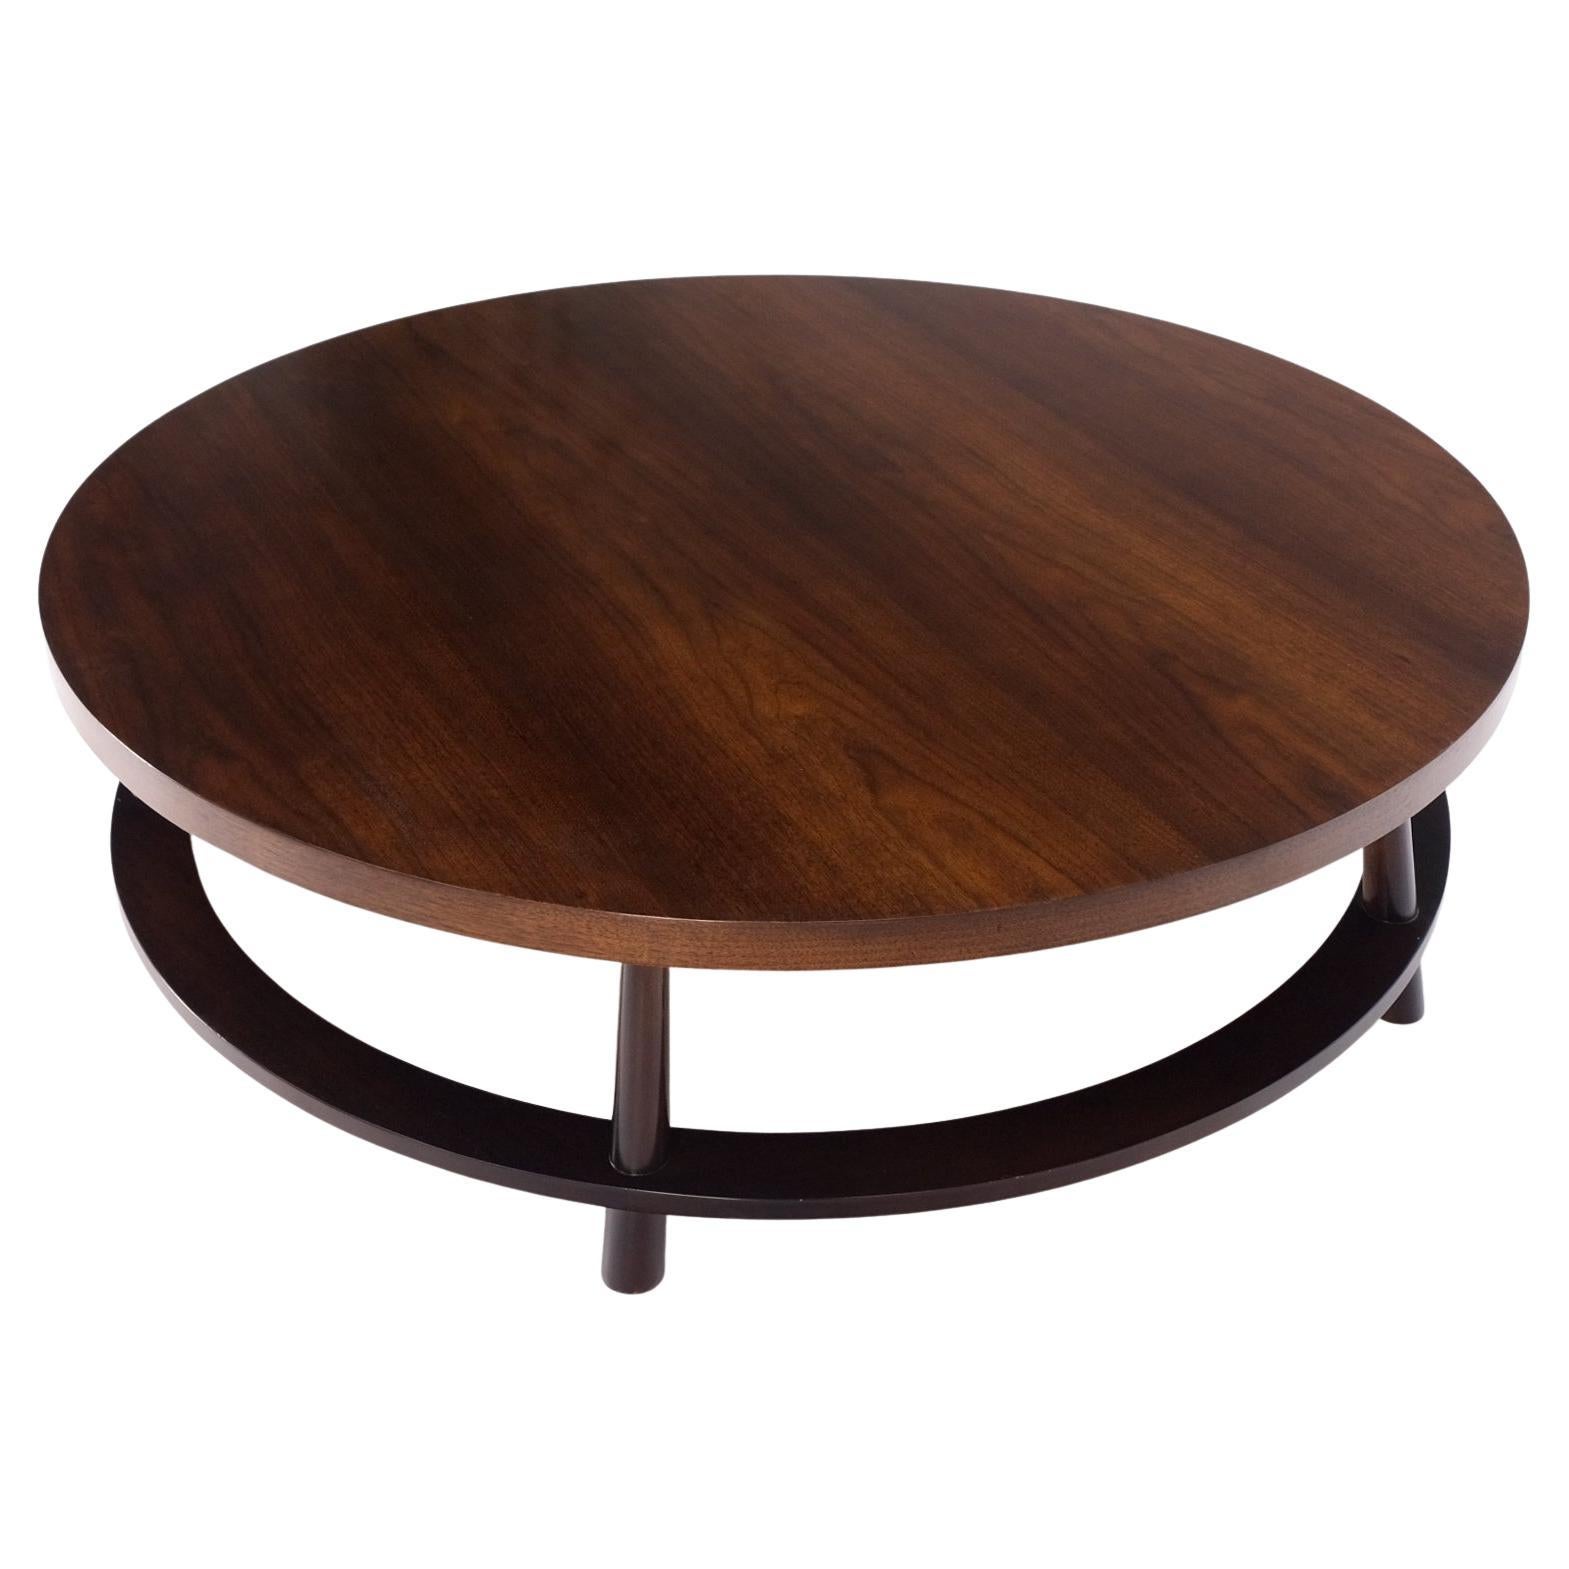 Gibbings for Widdicomb Mid-Century Modern Round Walnut Coffee Table Tapered Legs For Sale